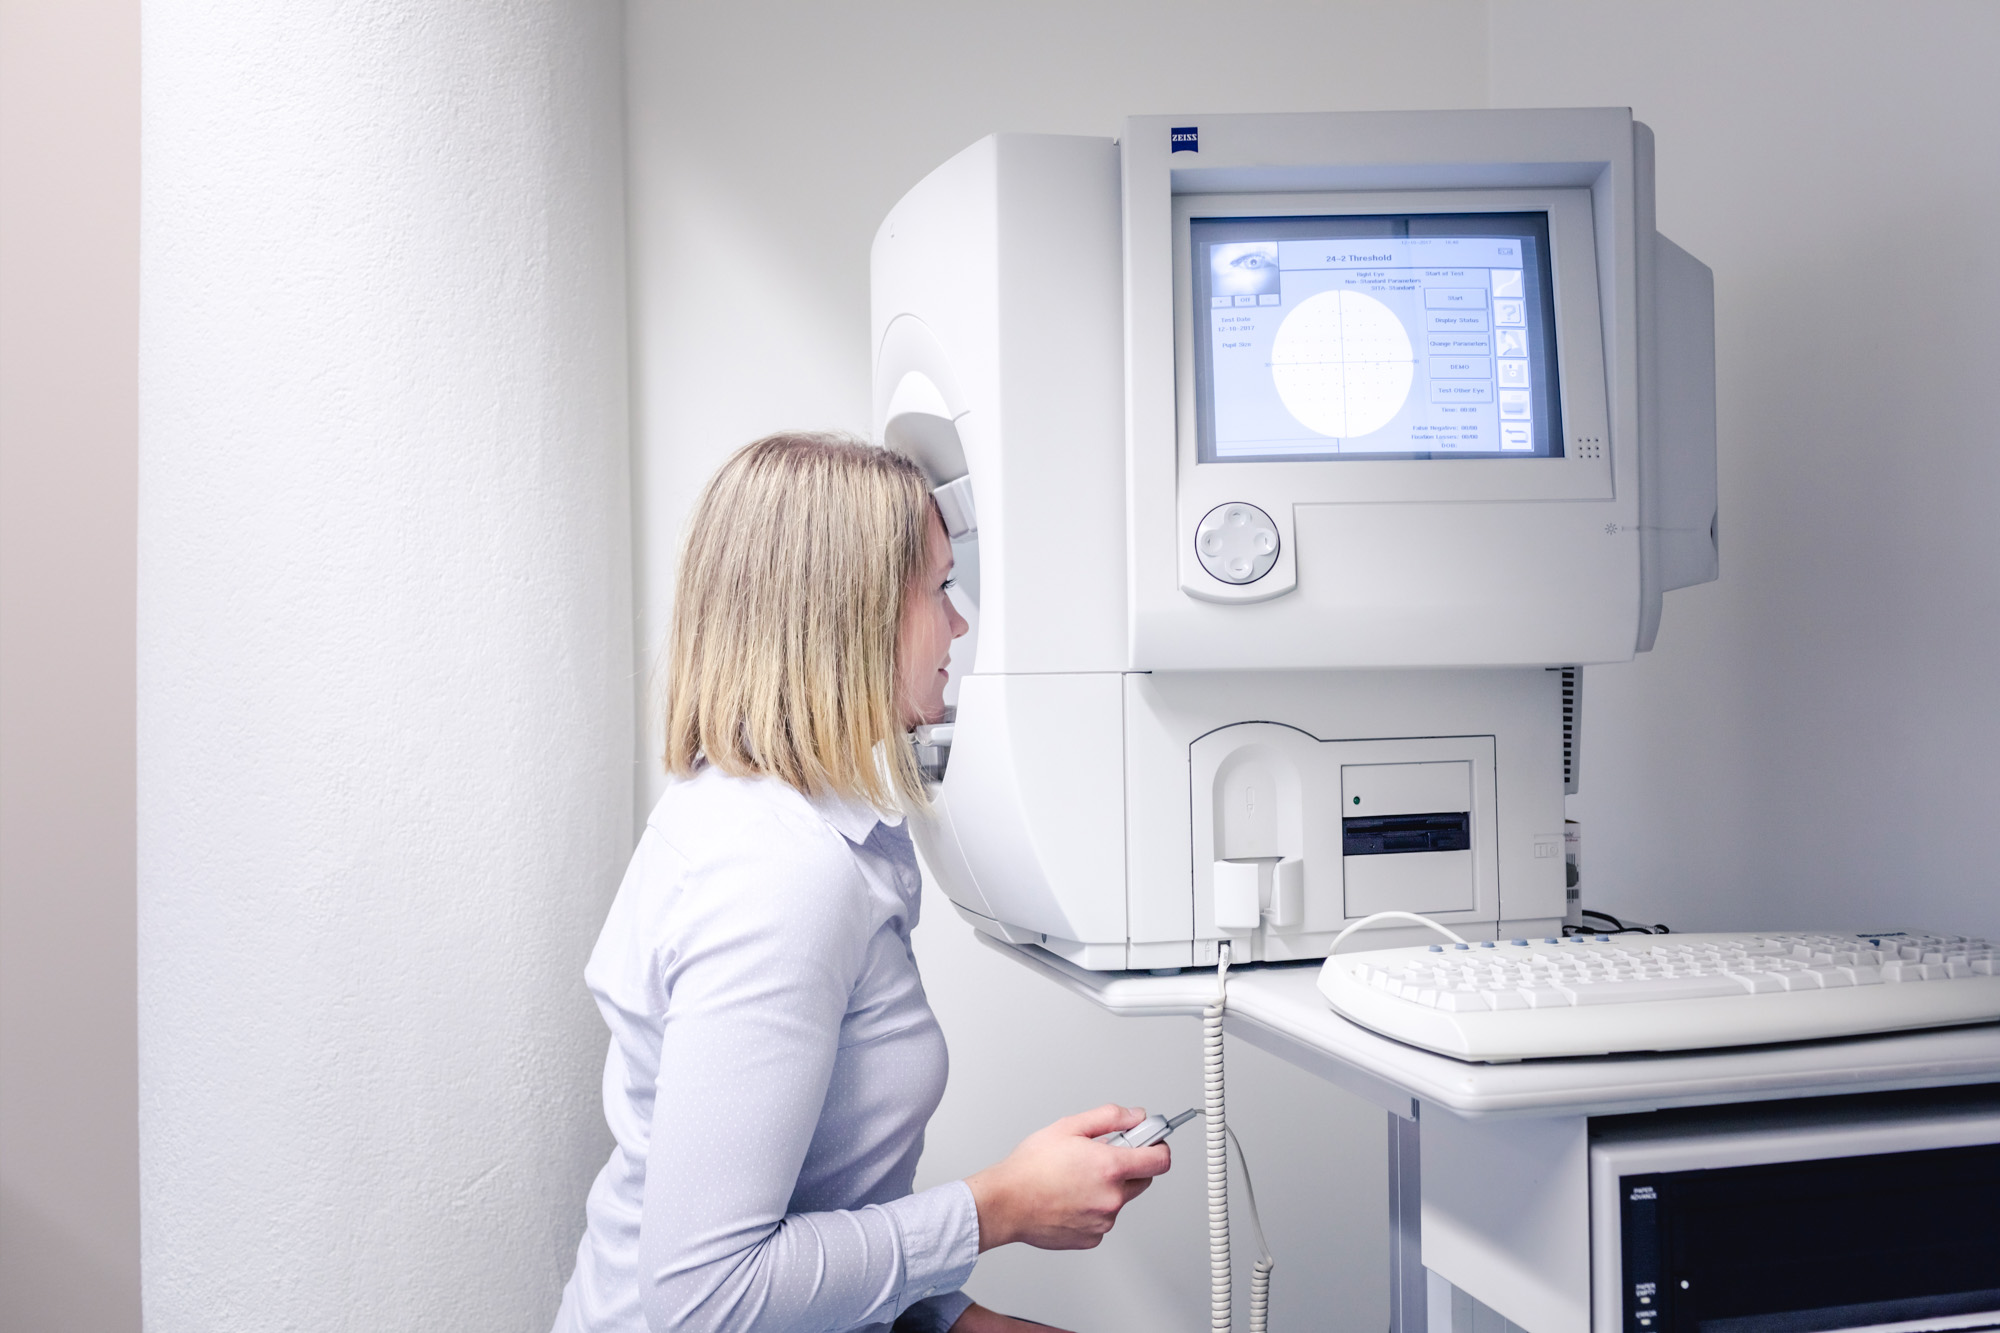 Glaucoma monitoring and treatment services